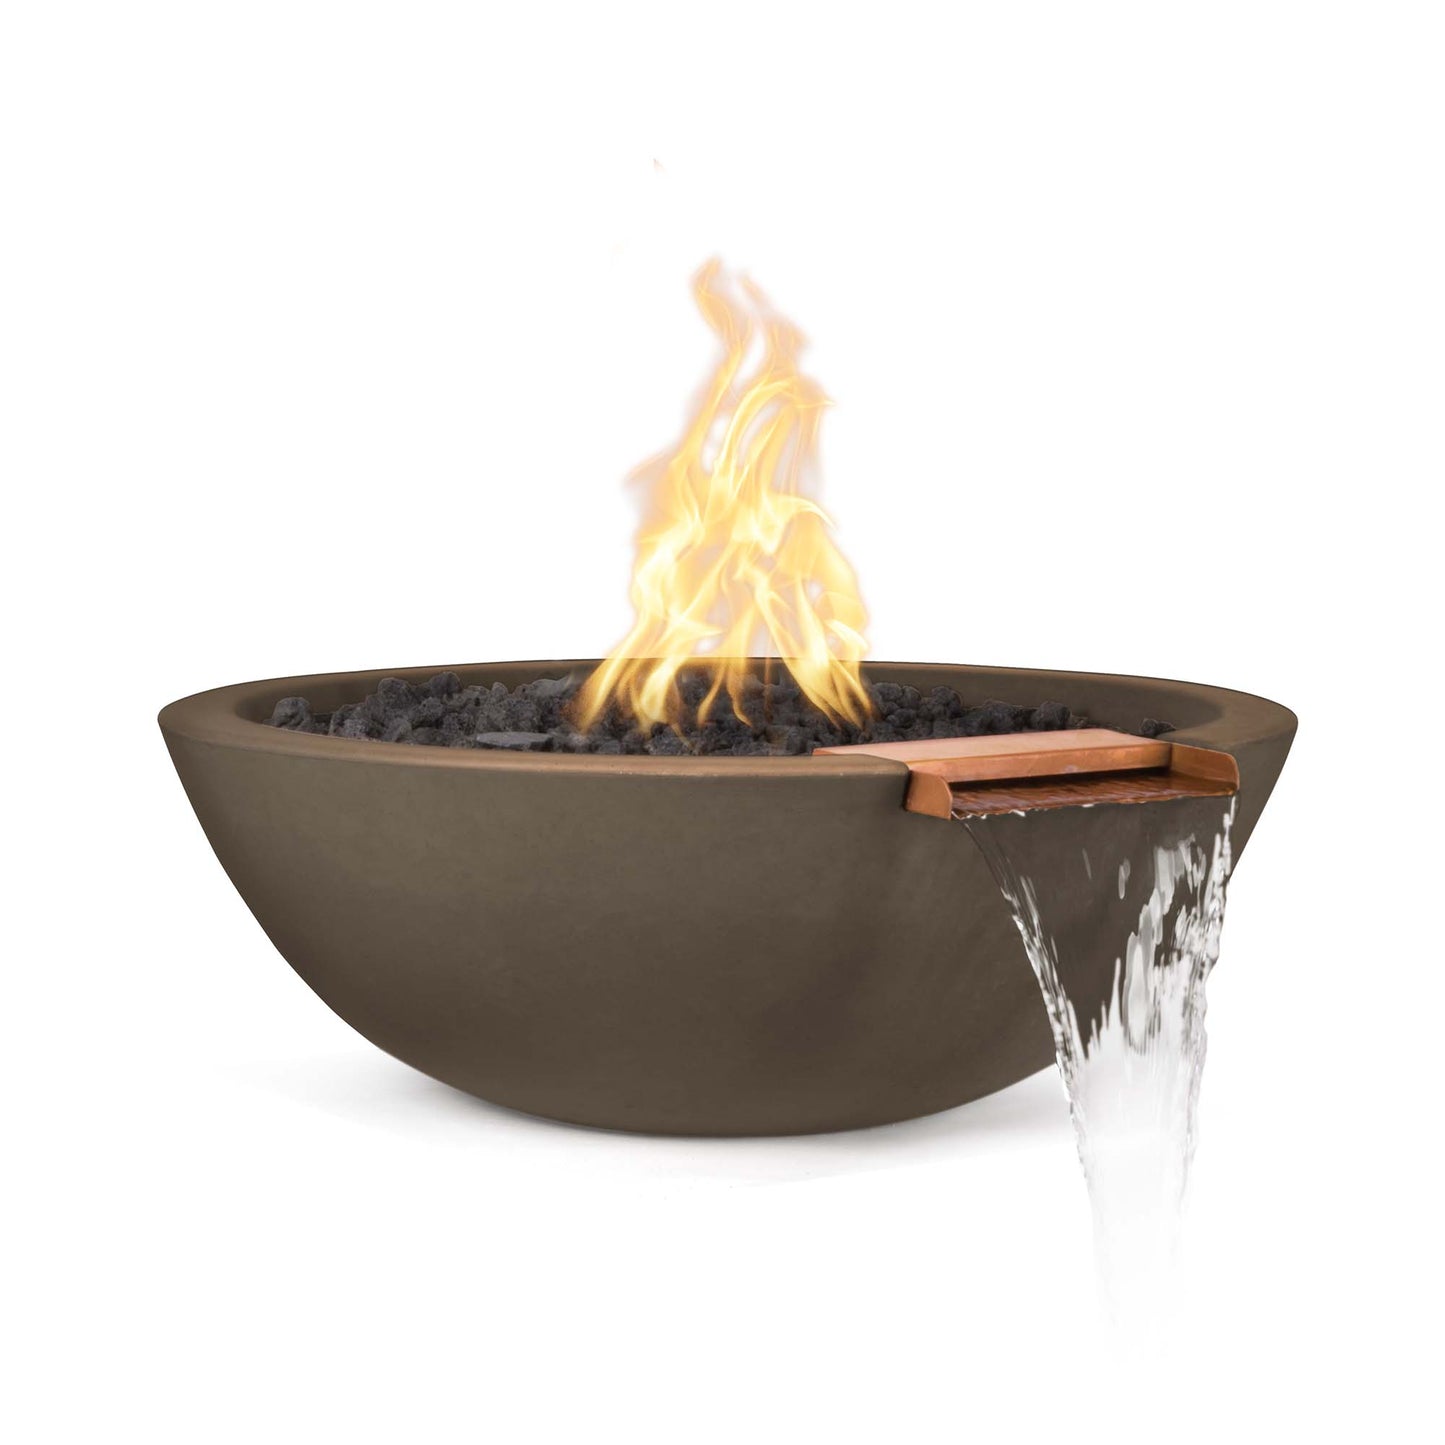 The Outdoor Plus Round Sedona 27" Chocolate GFRC Concrete Liquid Propane Fire & Water Bowl with Match Lit with Flame Sense Ignition